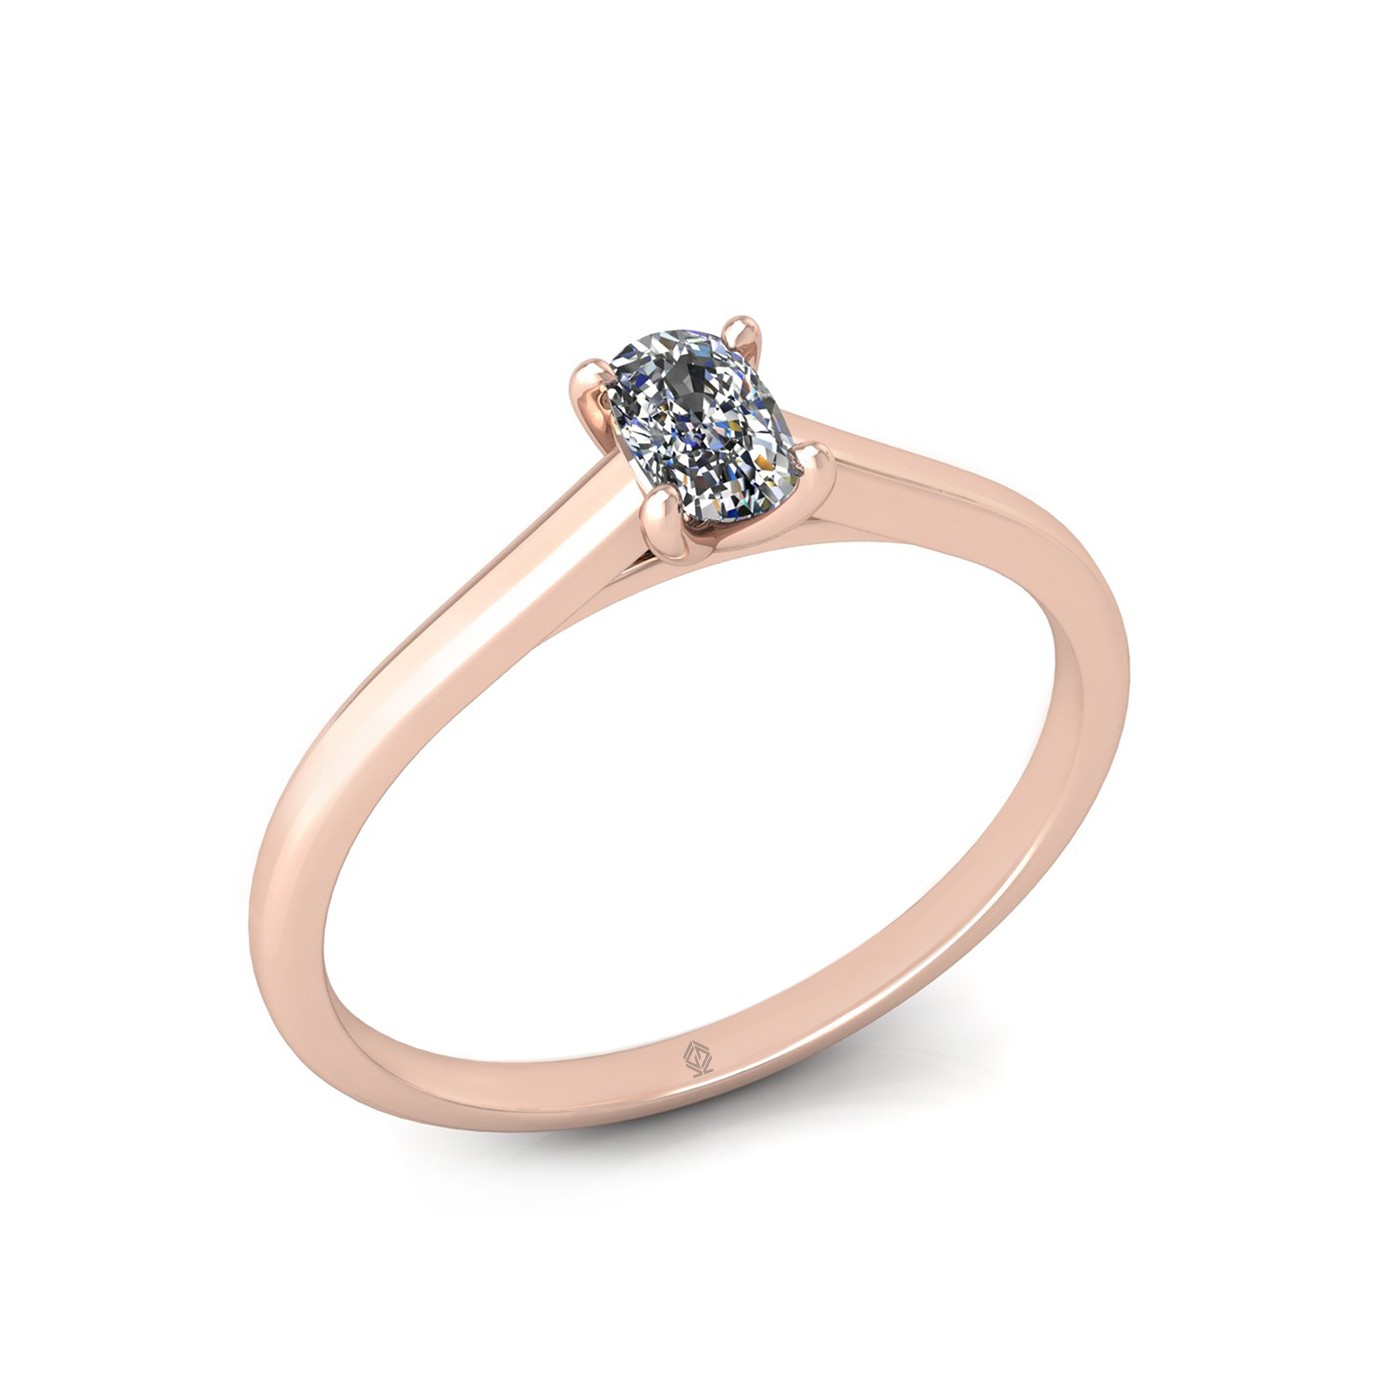 18k rose gold  0,30 ct 4 prongs solitaire elongated cushion cut diamond engagement ring with whisper thin band